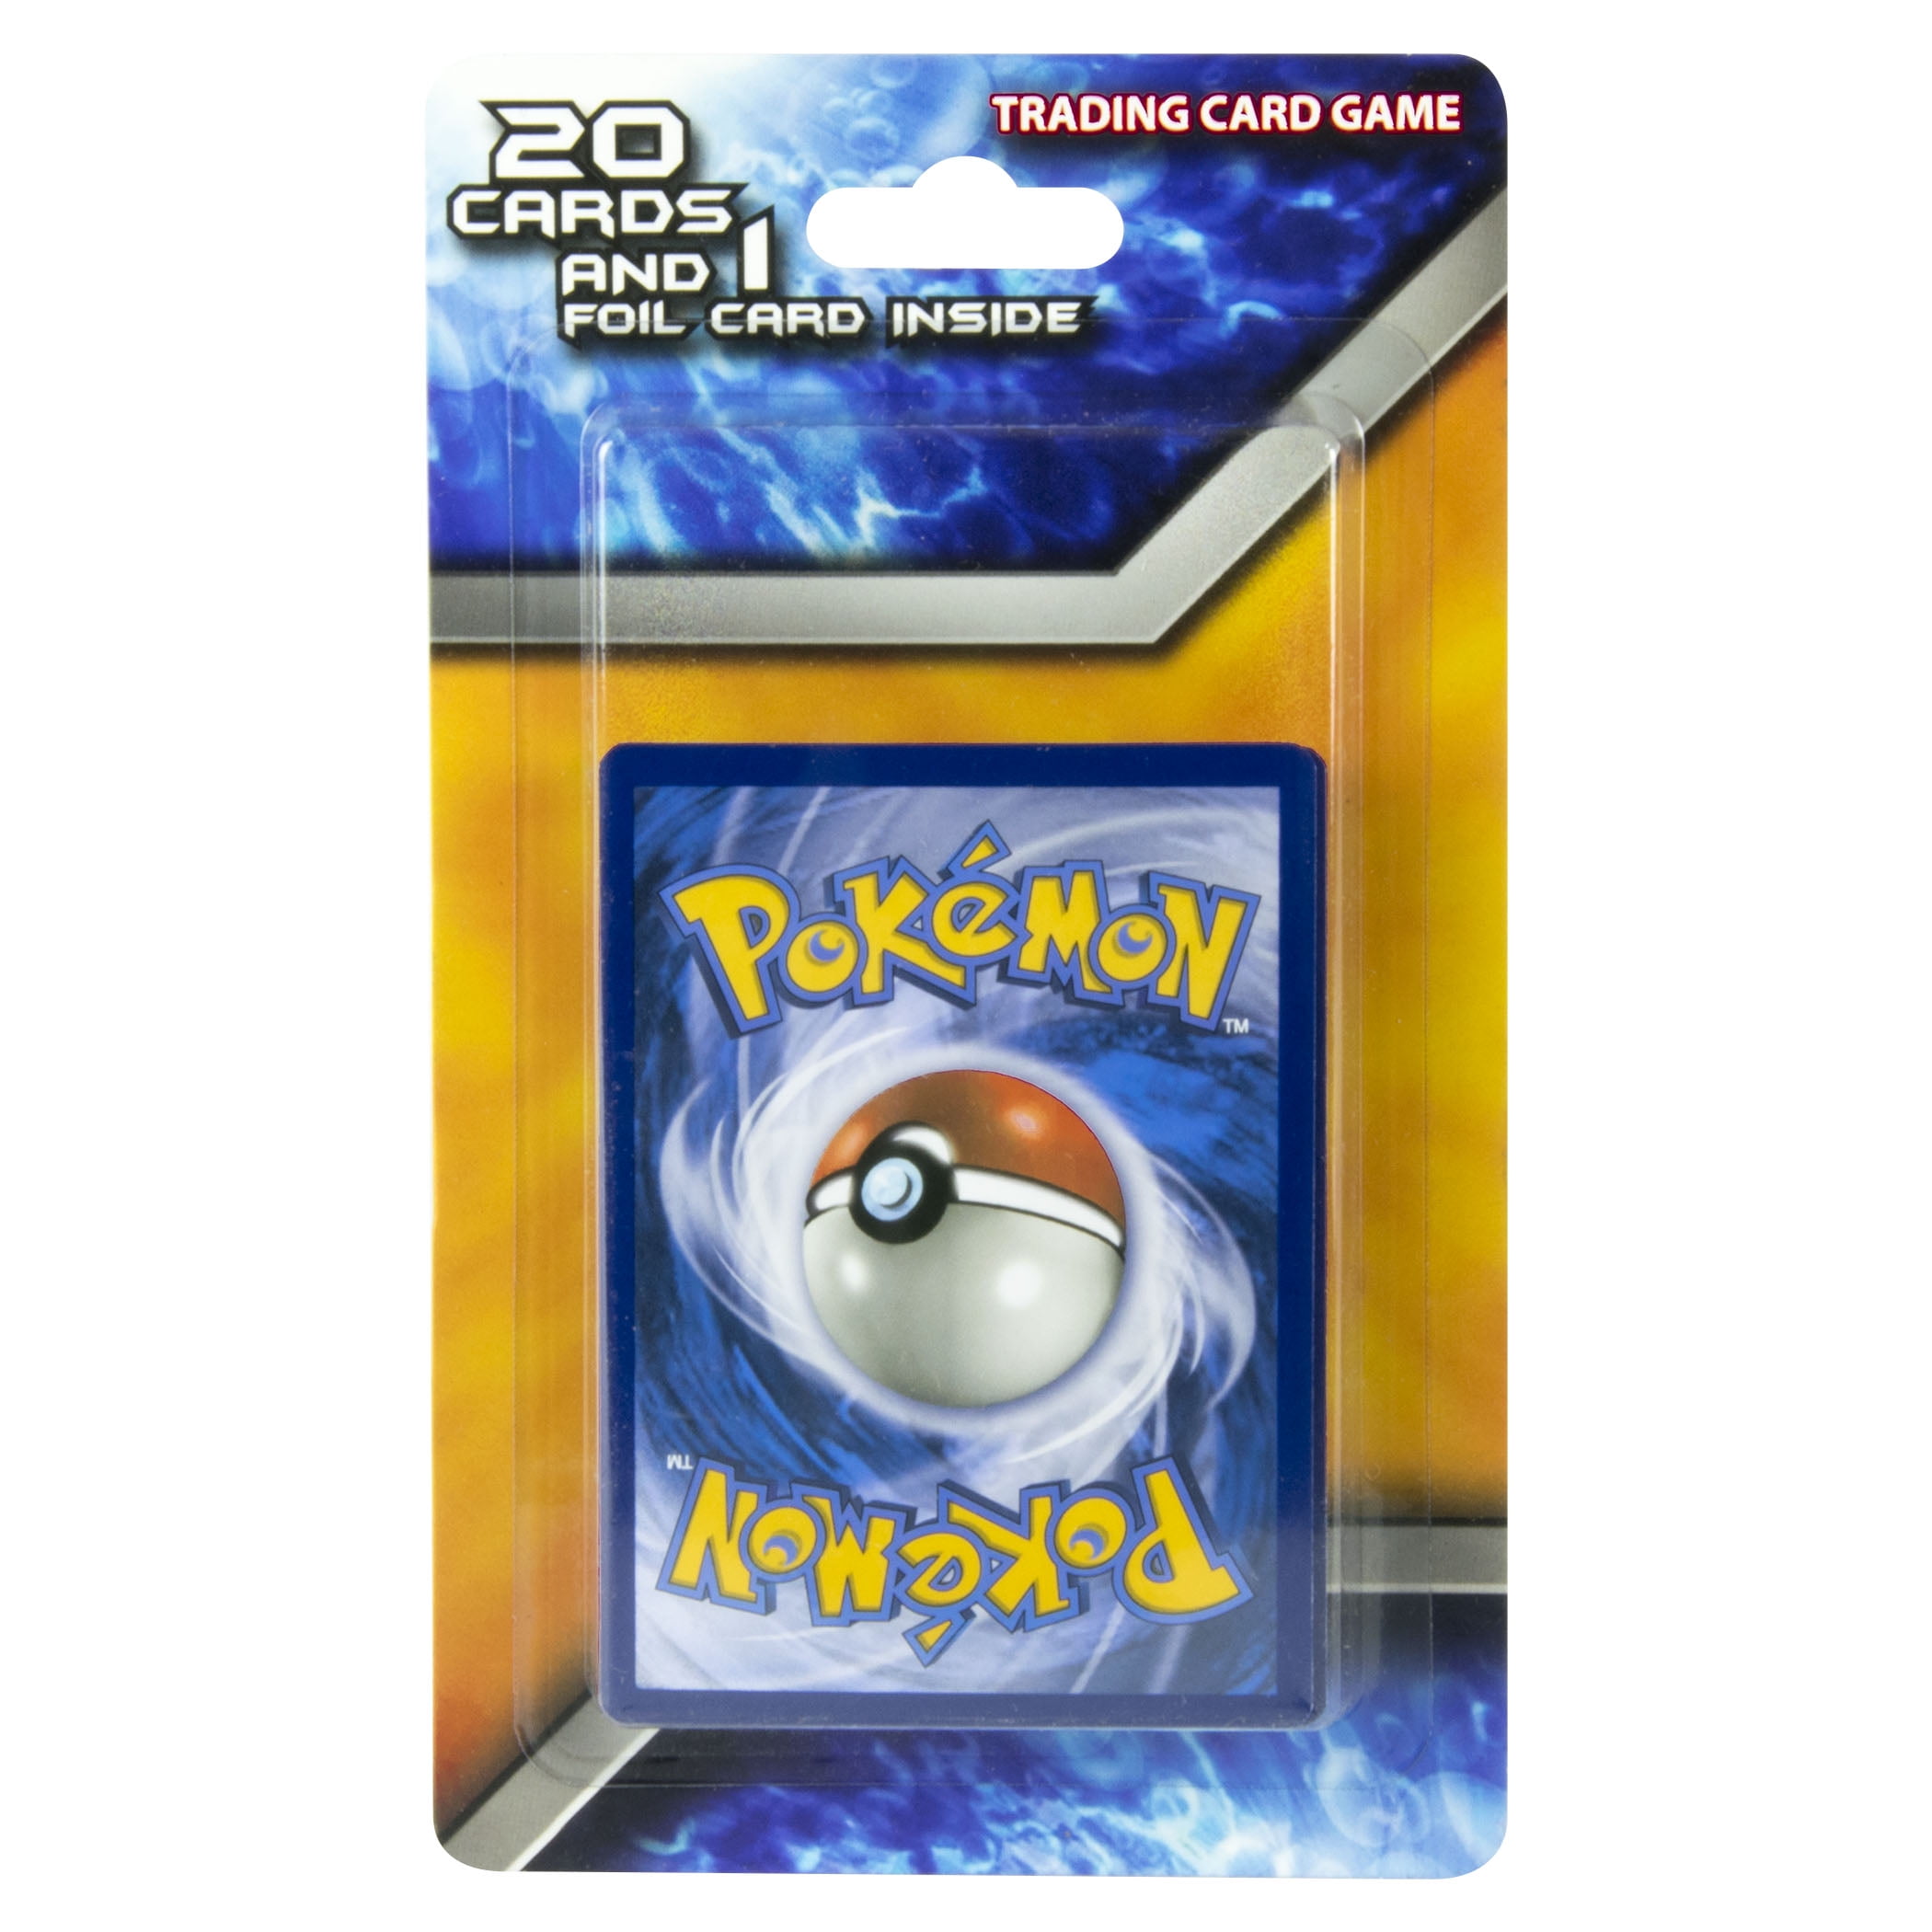 Mystery Pokemon Pack of 20 Cards with 1 Foil Card Charizard? 